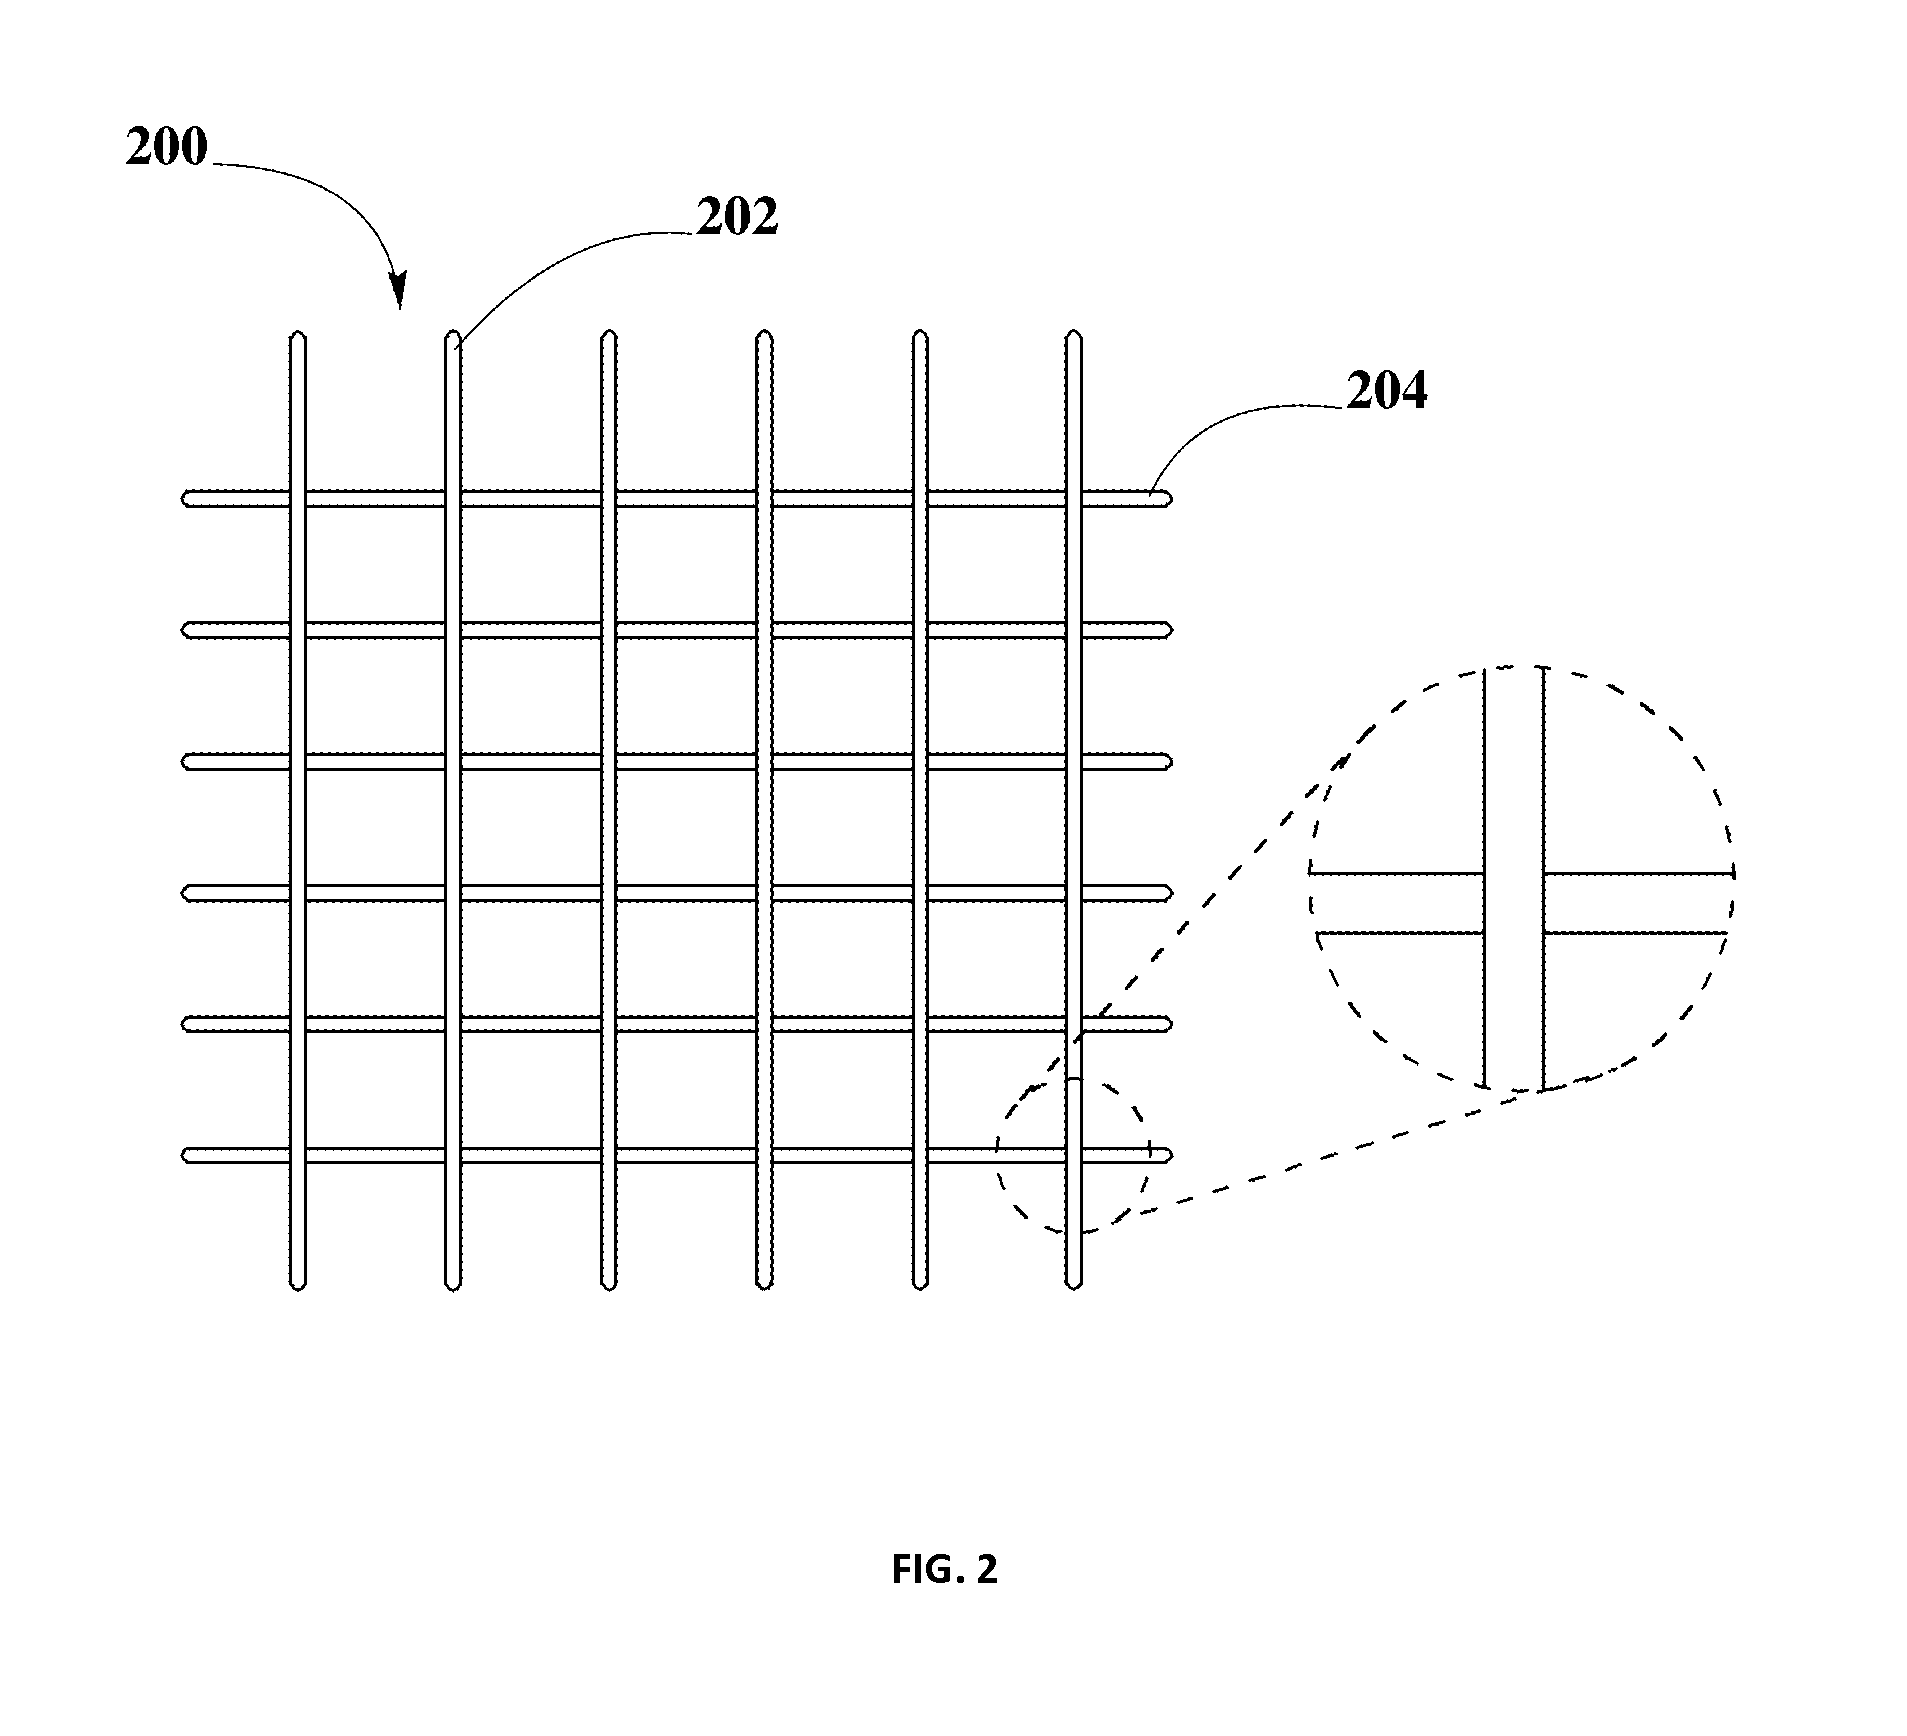 System for increasing efficiency of semiconductor photocatalysts employing a high surface area substrate